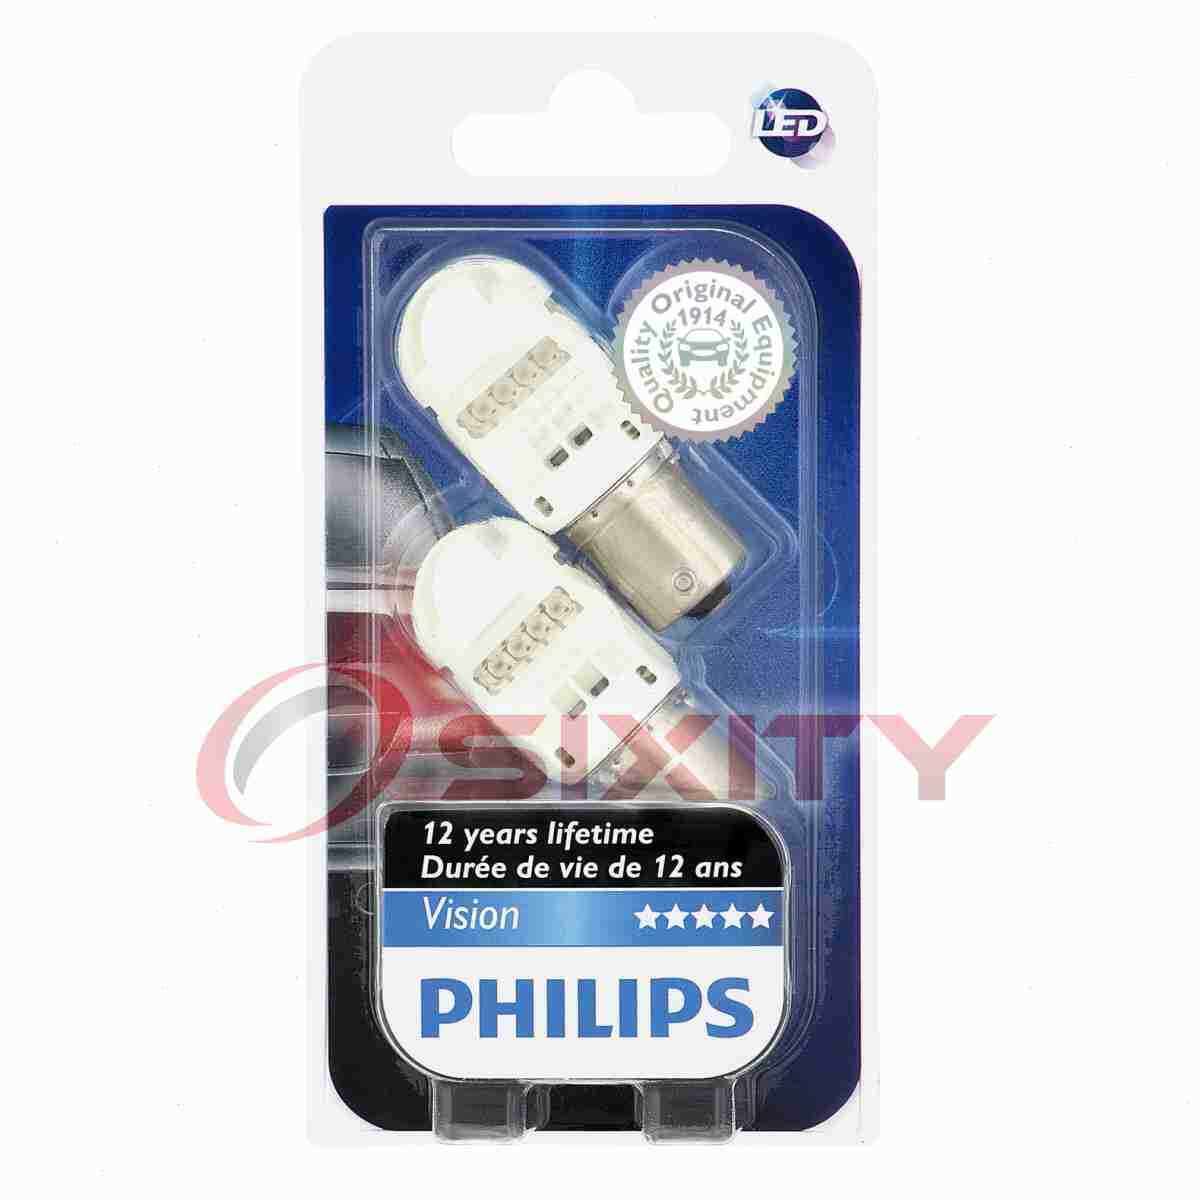 Philips Trunk Light Bulb for Buick LeSabre Park Avenue Riviera 1992-1996 cy